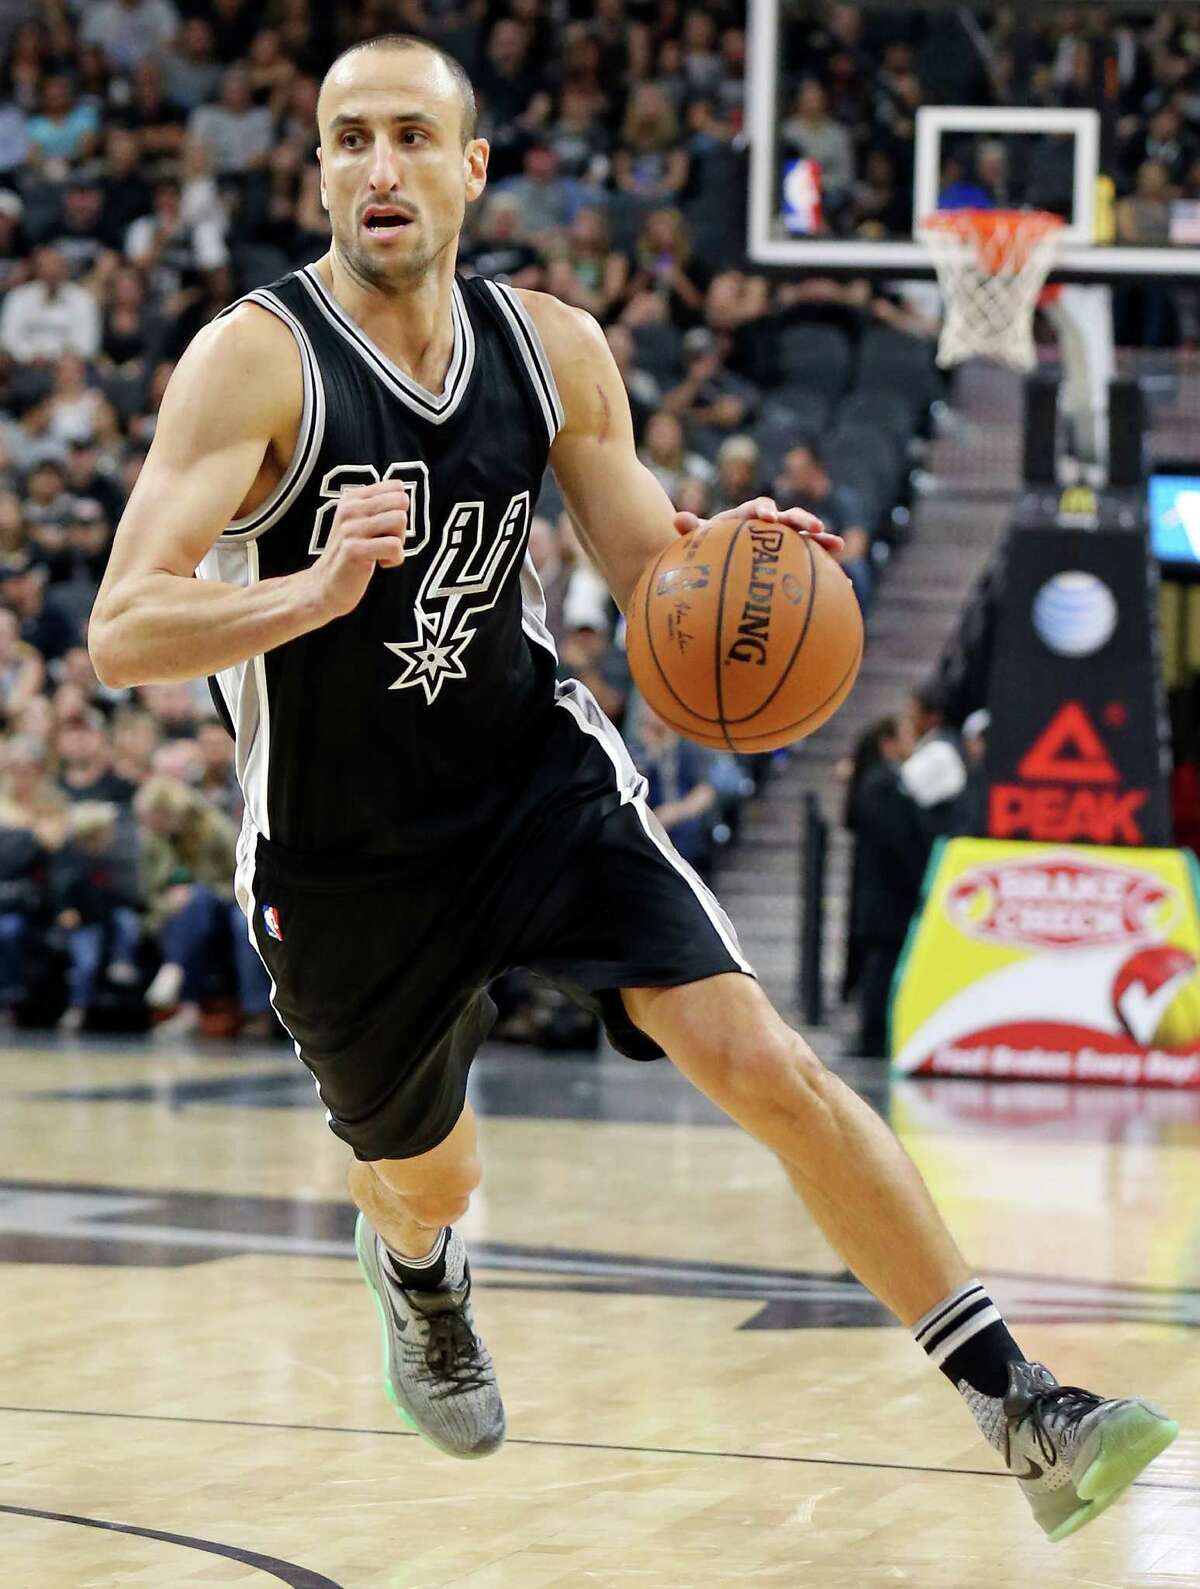 Spurs’ Manu Ginobili drives to the basket during first half action against the Brooklyn Nets on Oct. 30, 2015 at the AT&T Center.